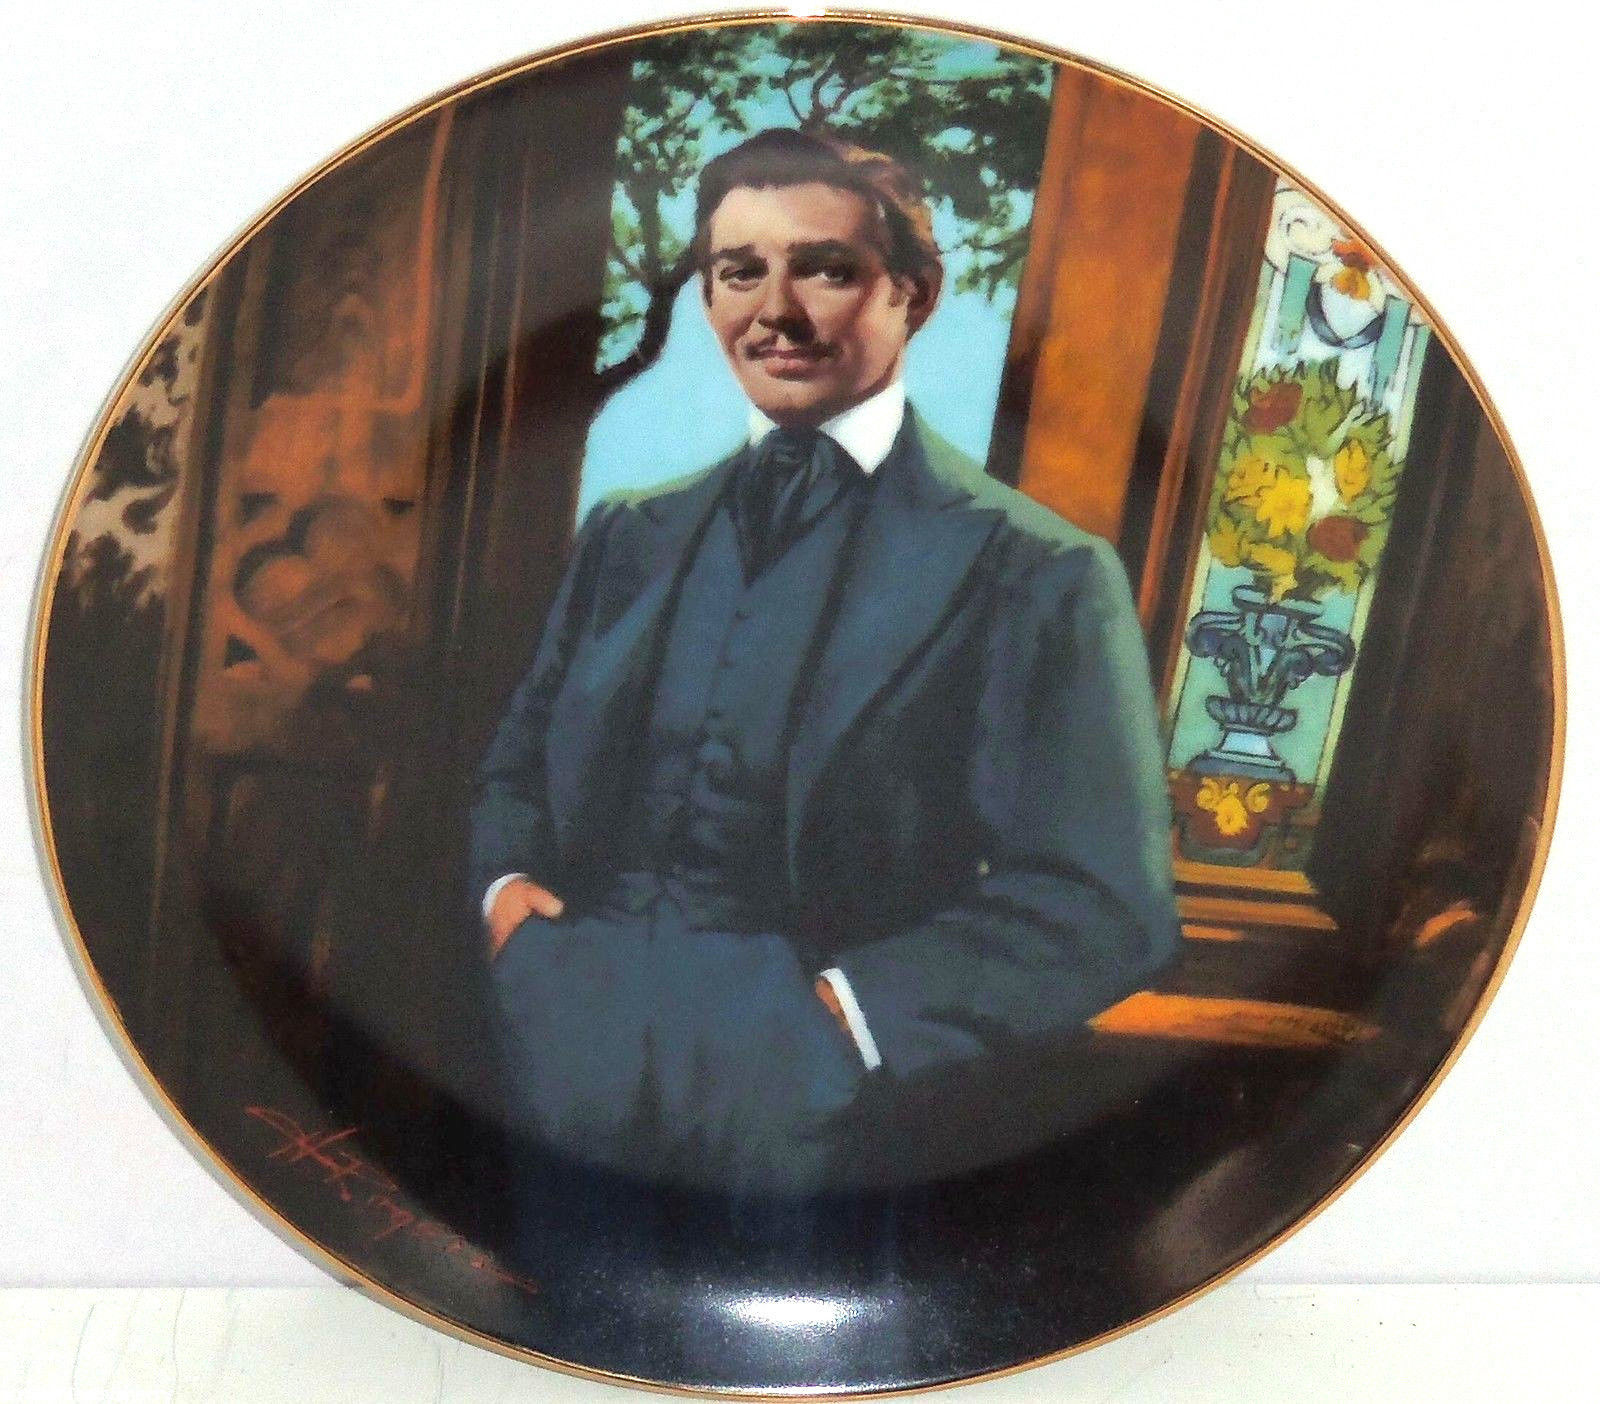 Gone with the Wind Collectors Plate Frankly My Dear Bradford Exchange Vintage - $59.95